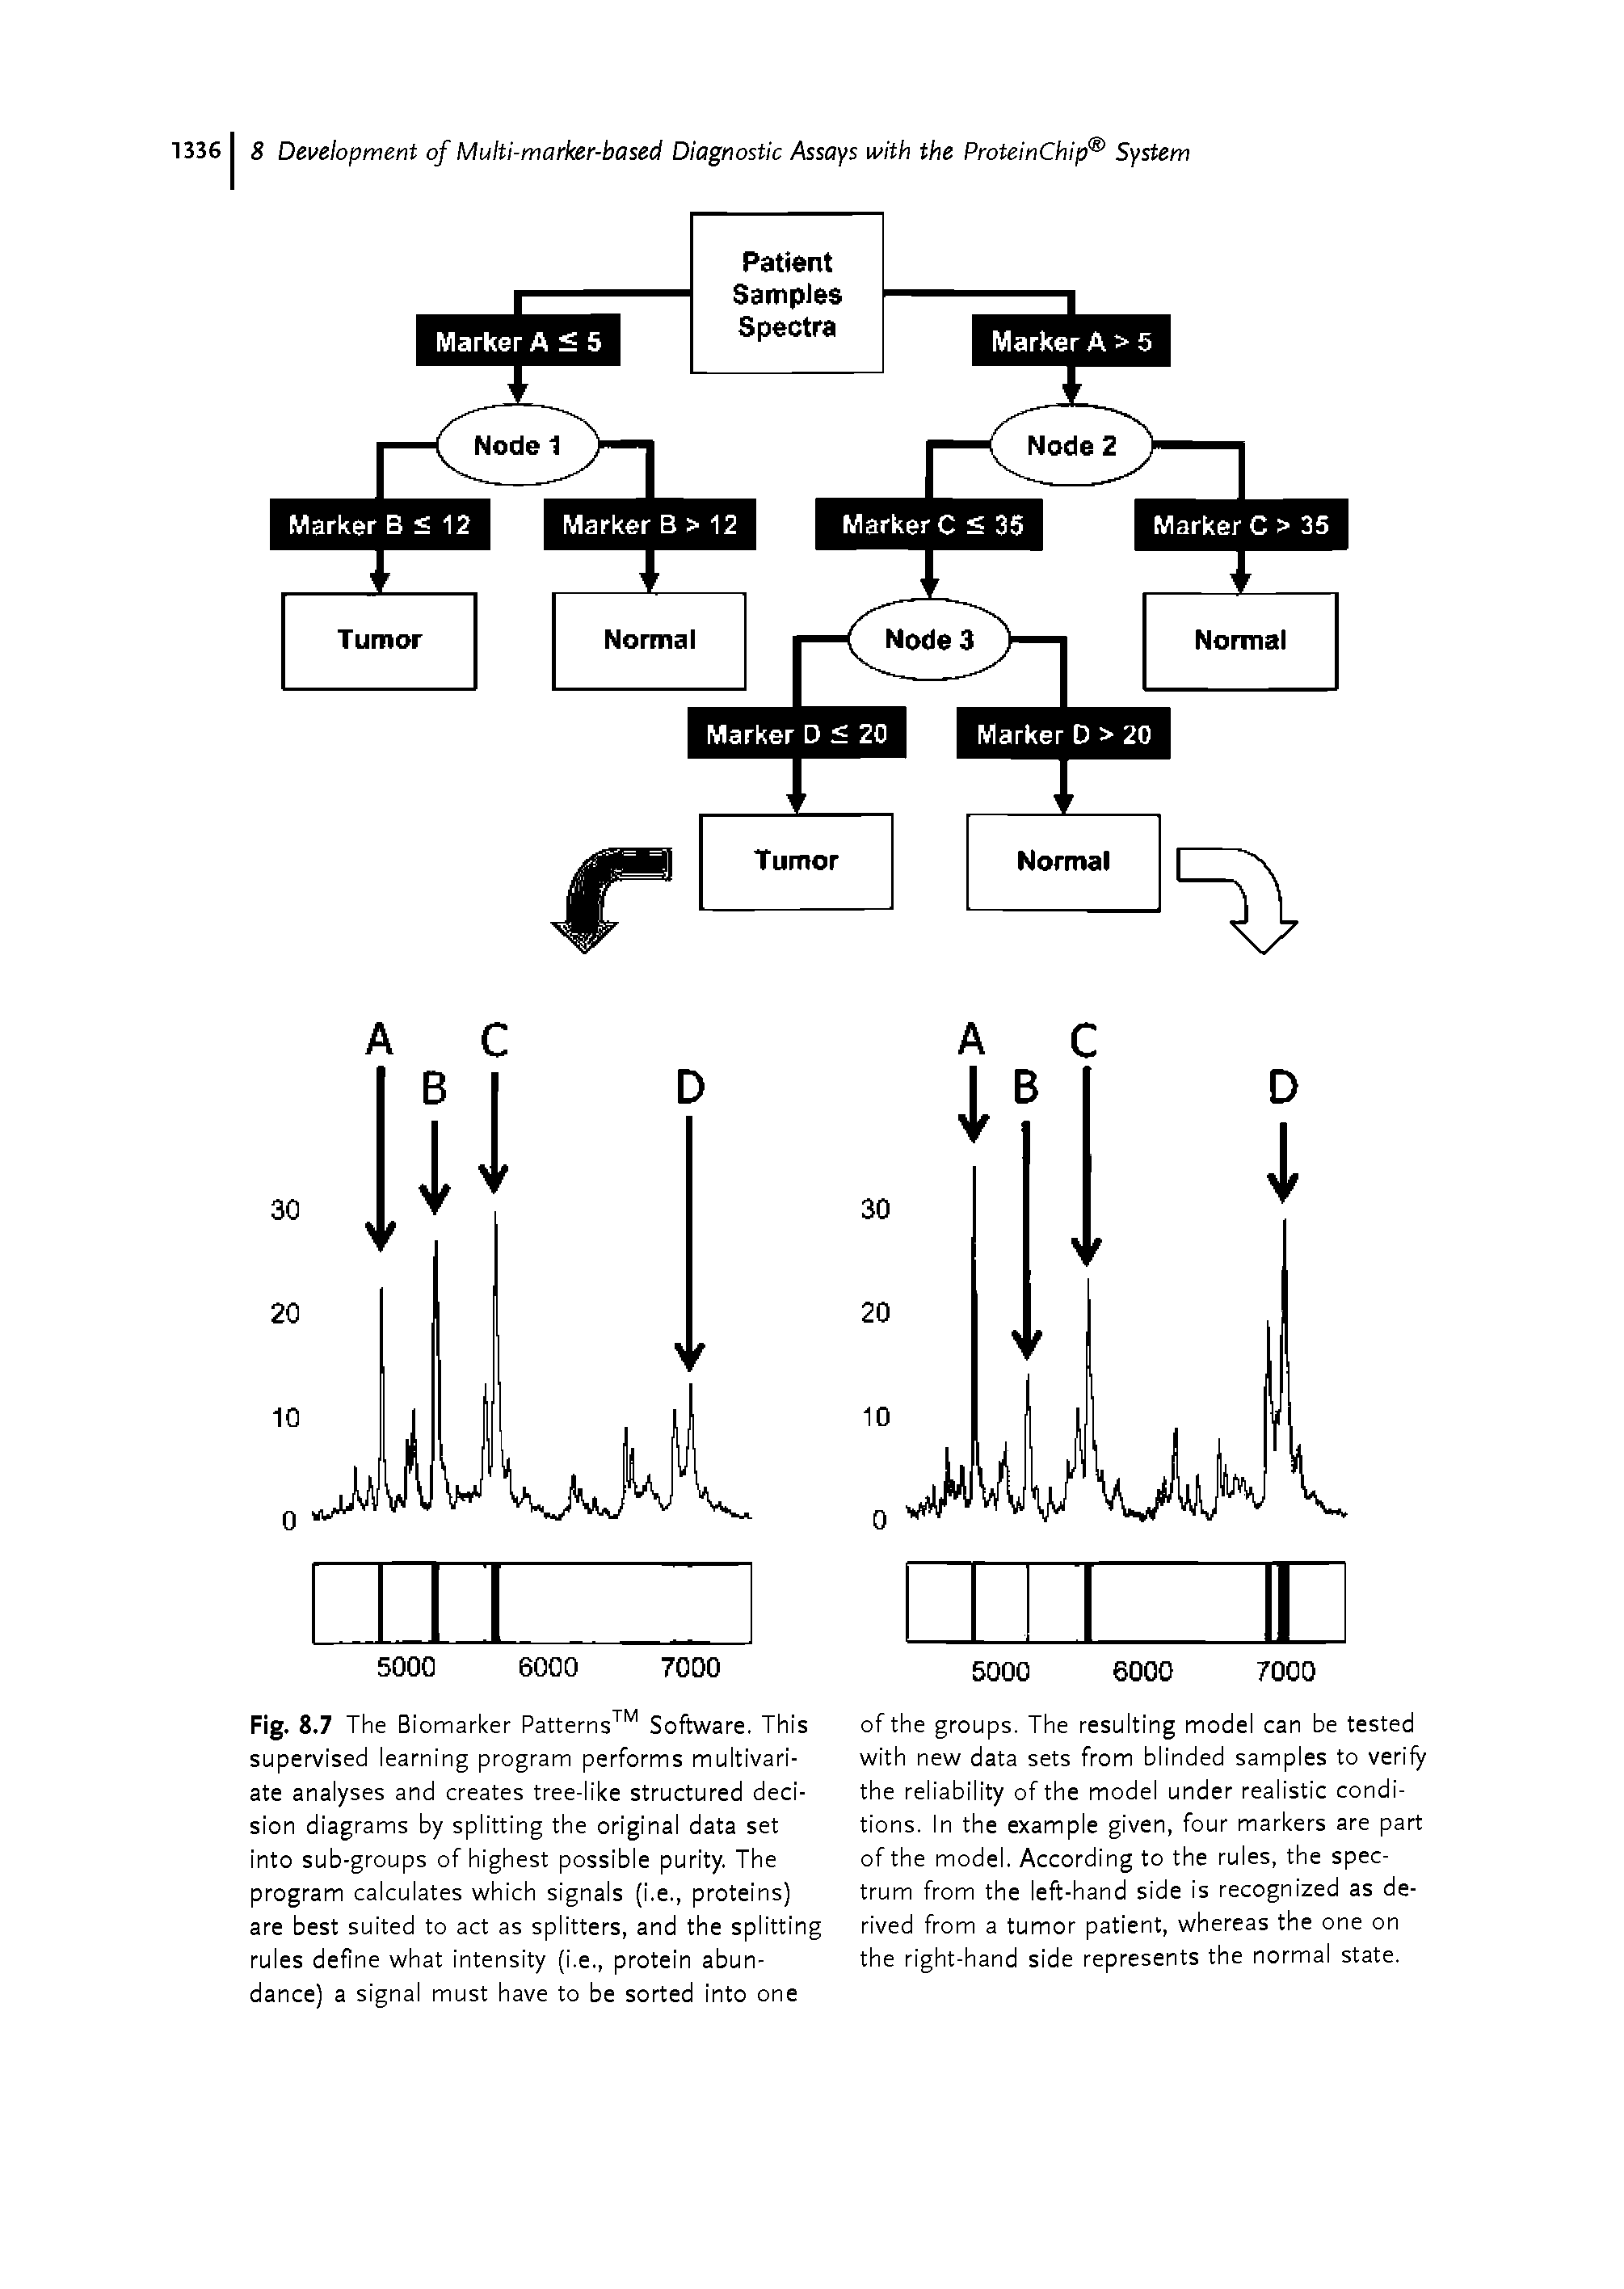 Fig. 8.7 The Biomarker Patterns Software. This supervised learning program performs multivariate analyses and creates tree-like structured decision diagrams by splitting the original data set into sub-groups of highest possible purity. The program calculates which signals (i.e., proteins) are best suited to act as splitters, and the splitting rules define what intensity (i.e., protein abundance) a signal must have to be sorted into one...